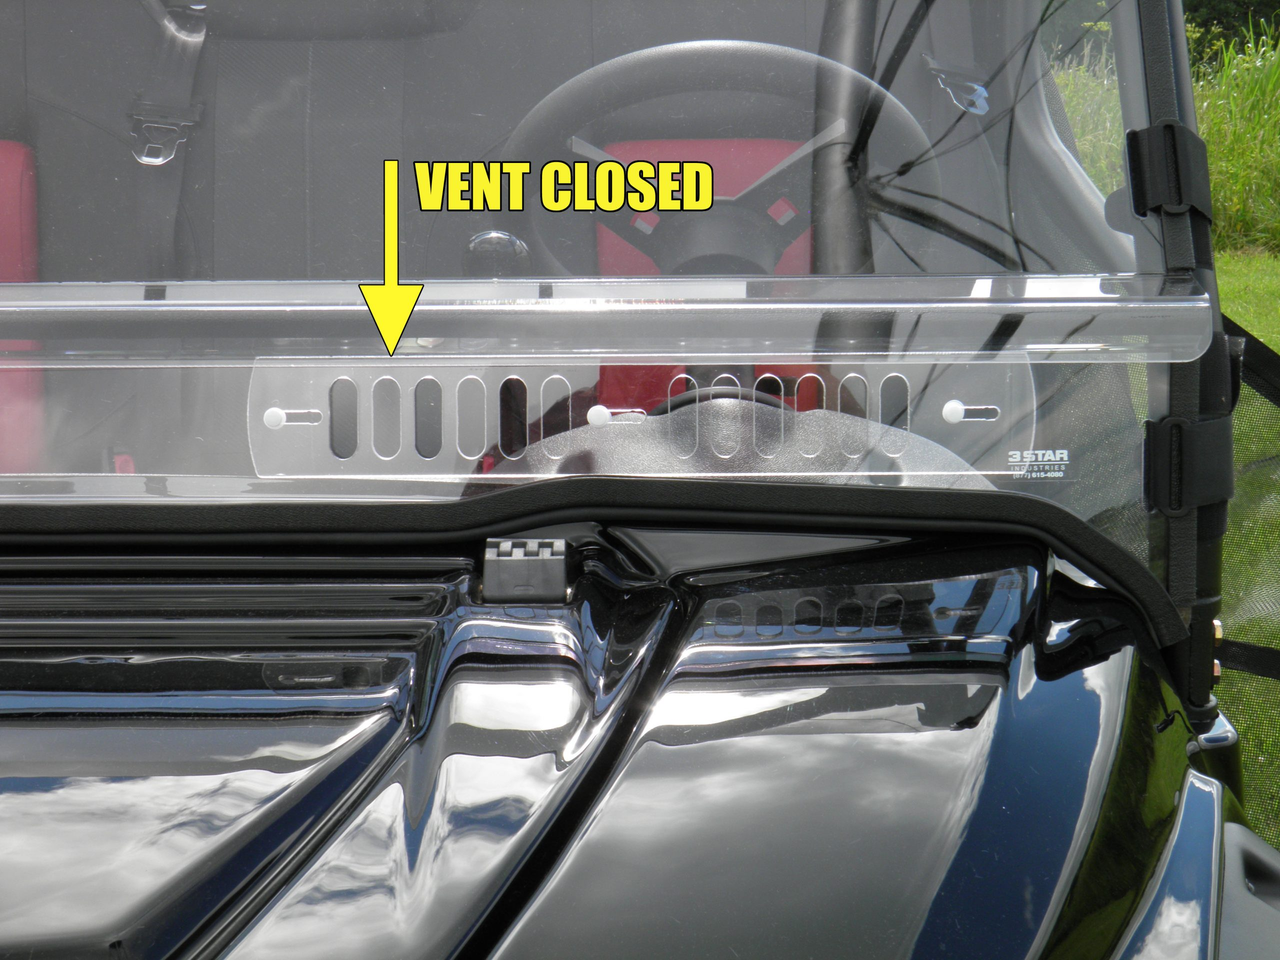 3 Star side x side can-am defender windshield vents closed